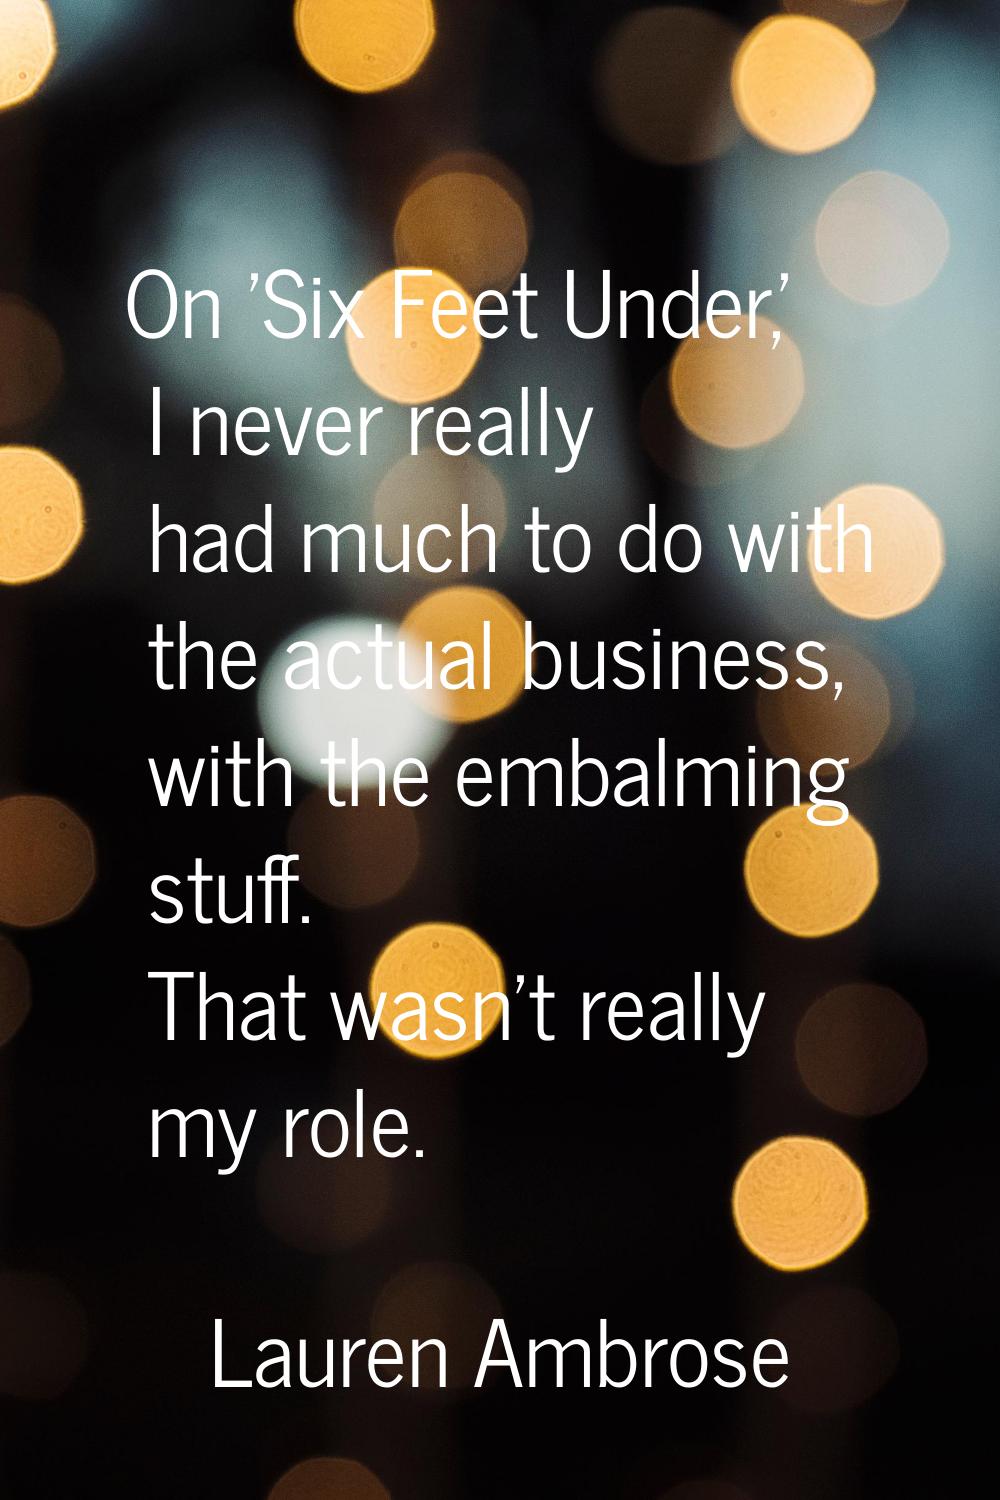 On 'Six Feet Under,' I never really had much to do with the actual business, with the embalming stu